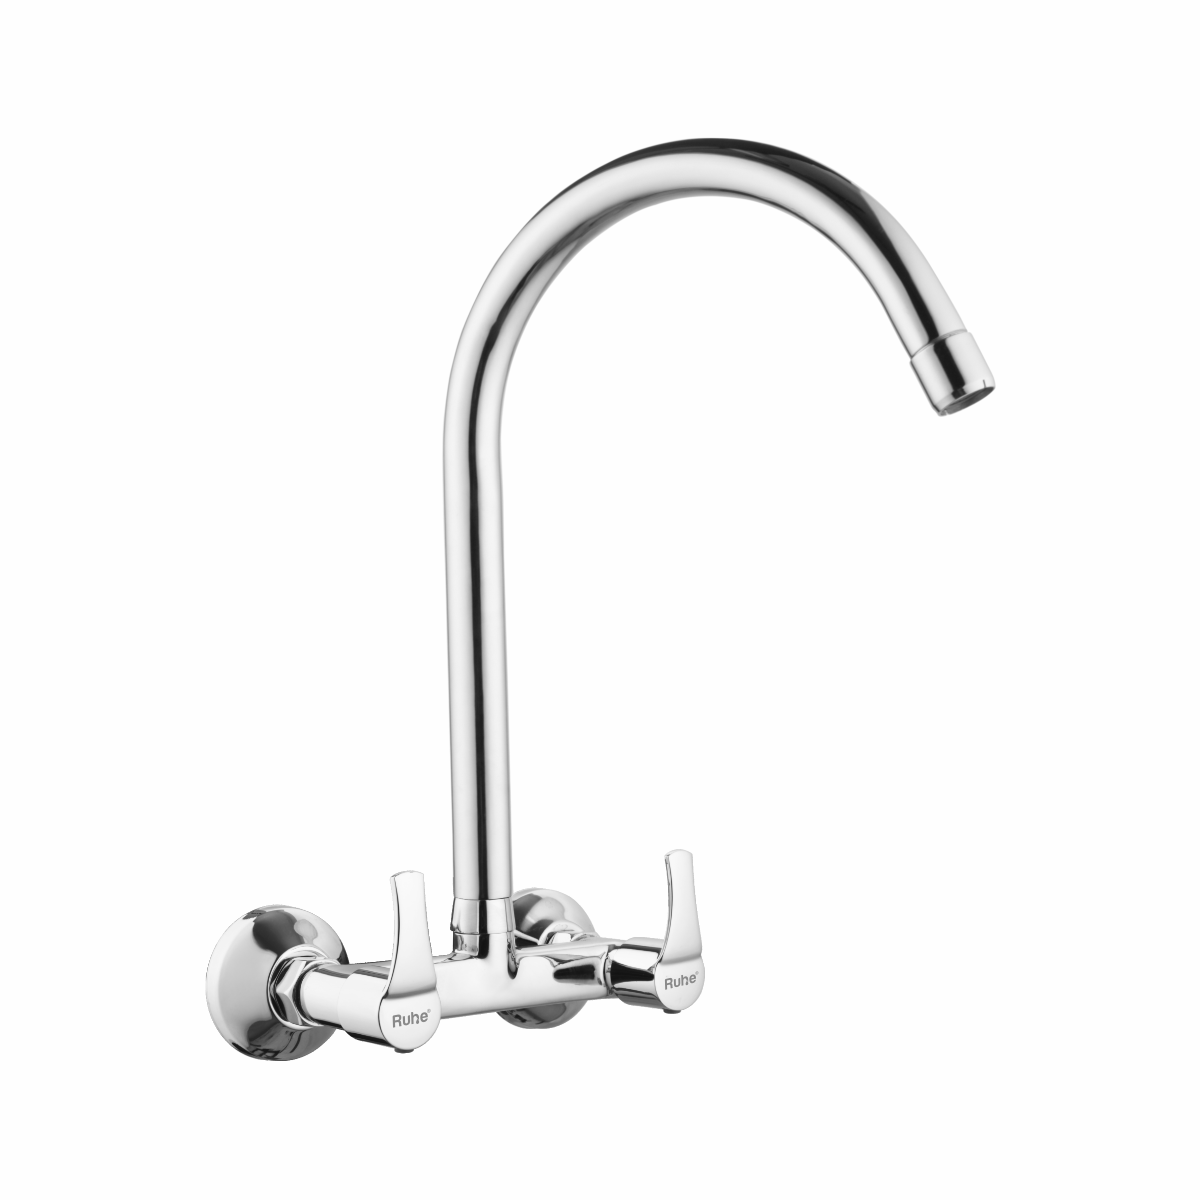 Euphoria Sink Mixer with Large (20 inches) Round Swivel Spout Brass Faucet